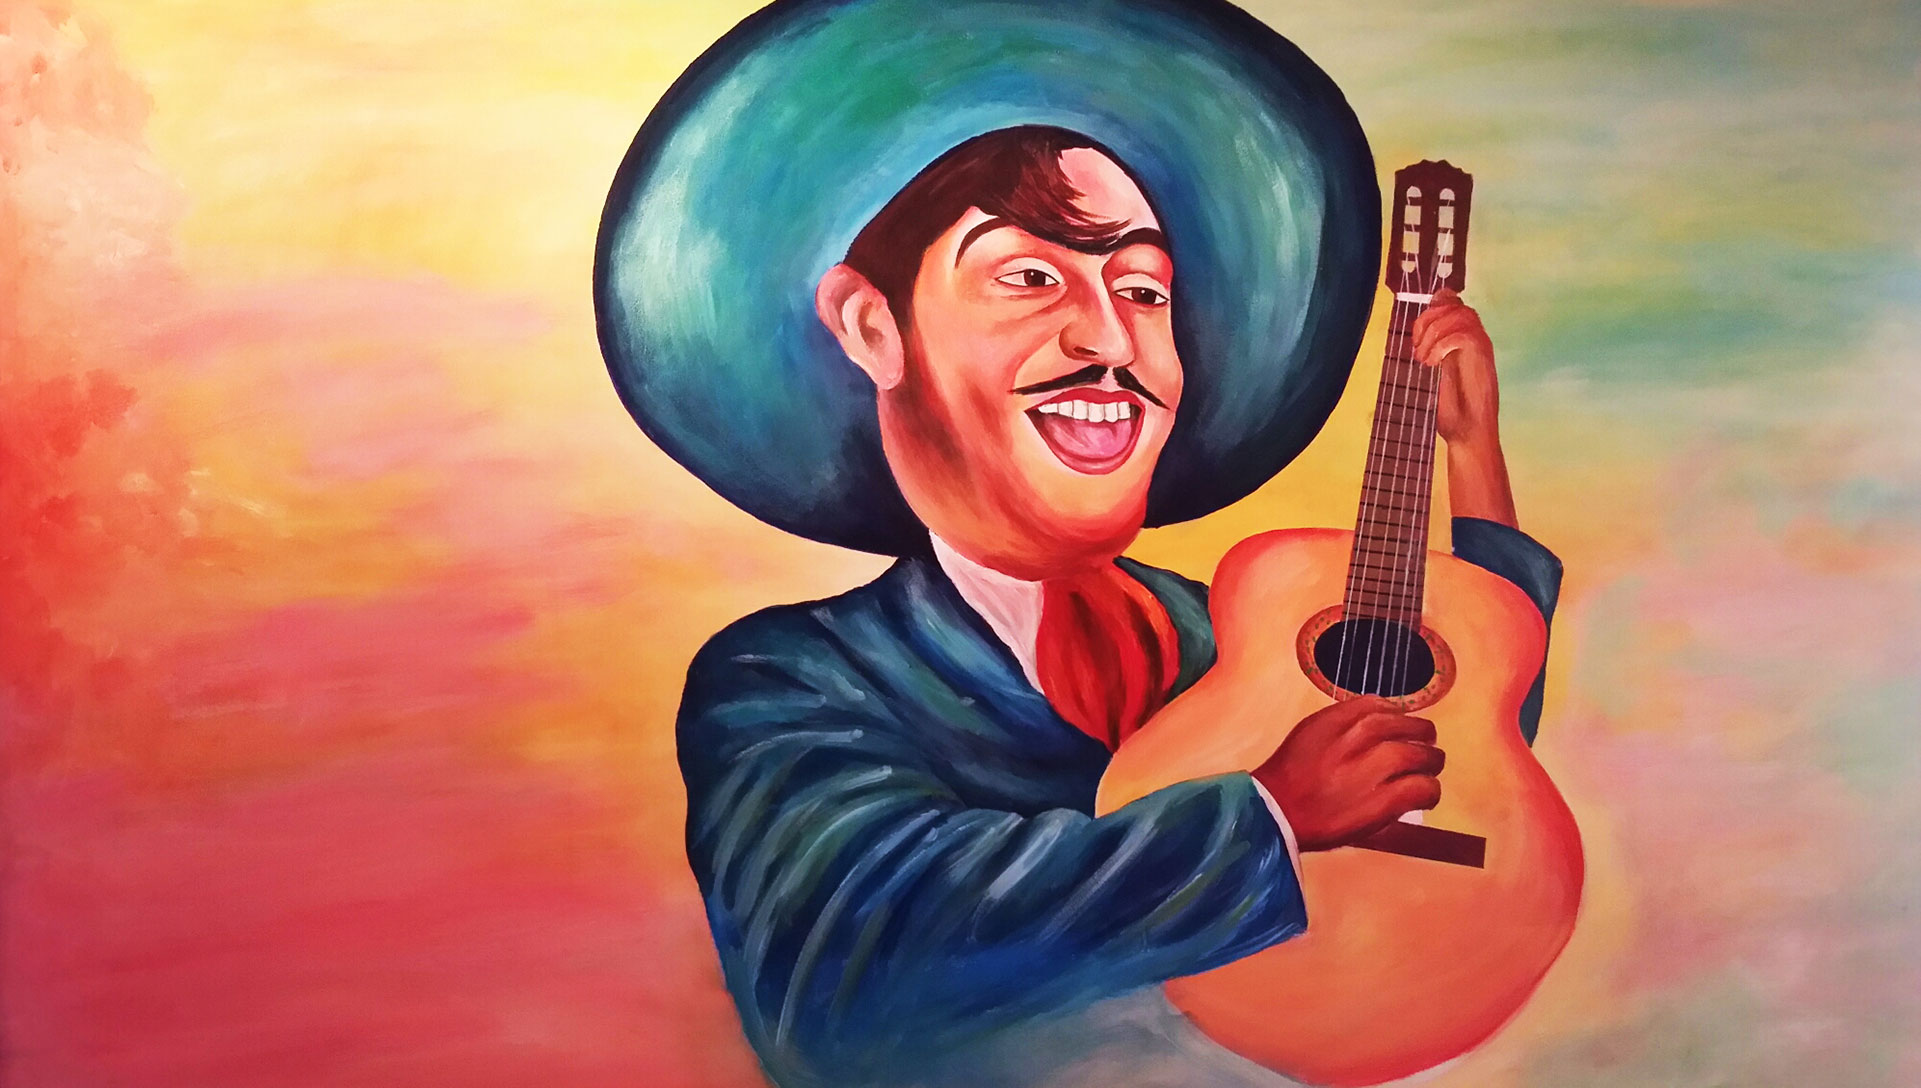 Mexican musician playing the guitar